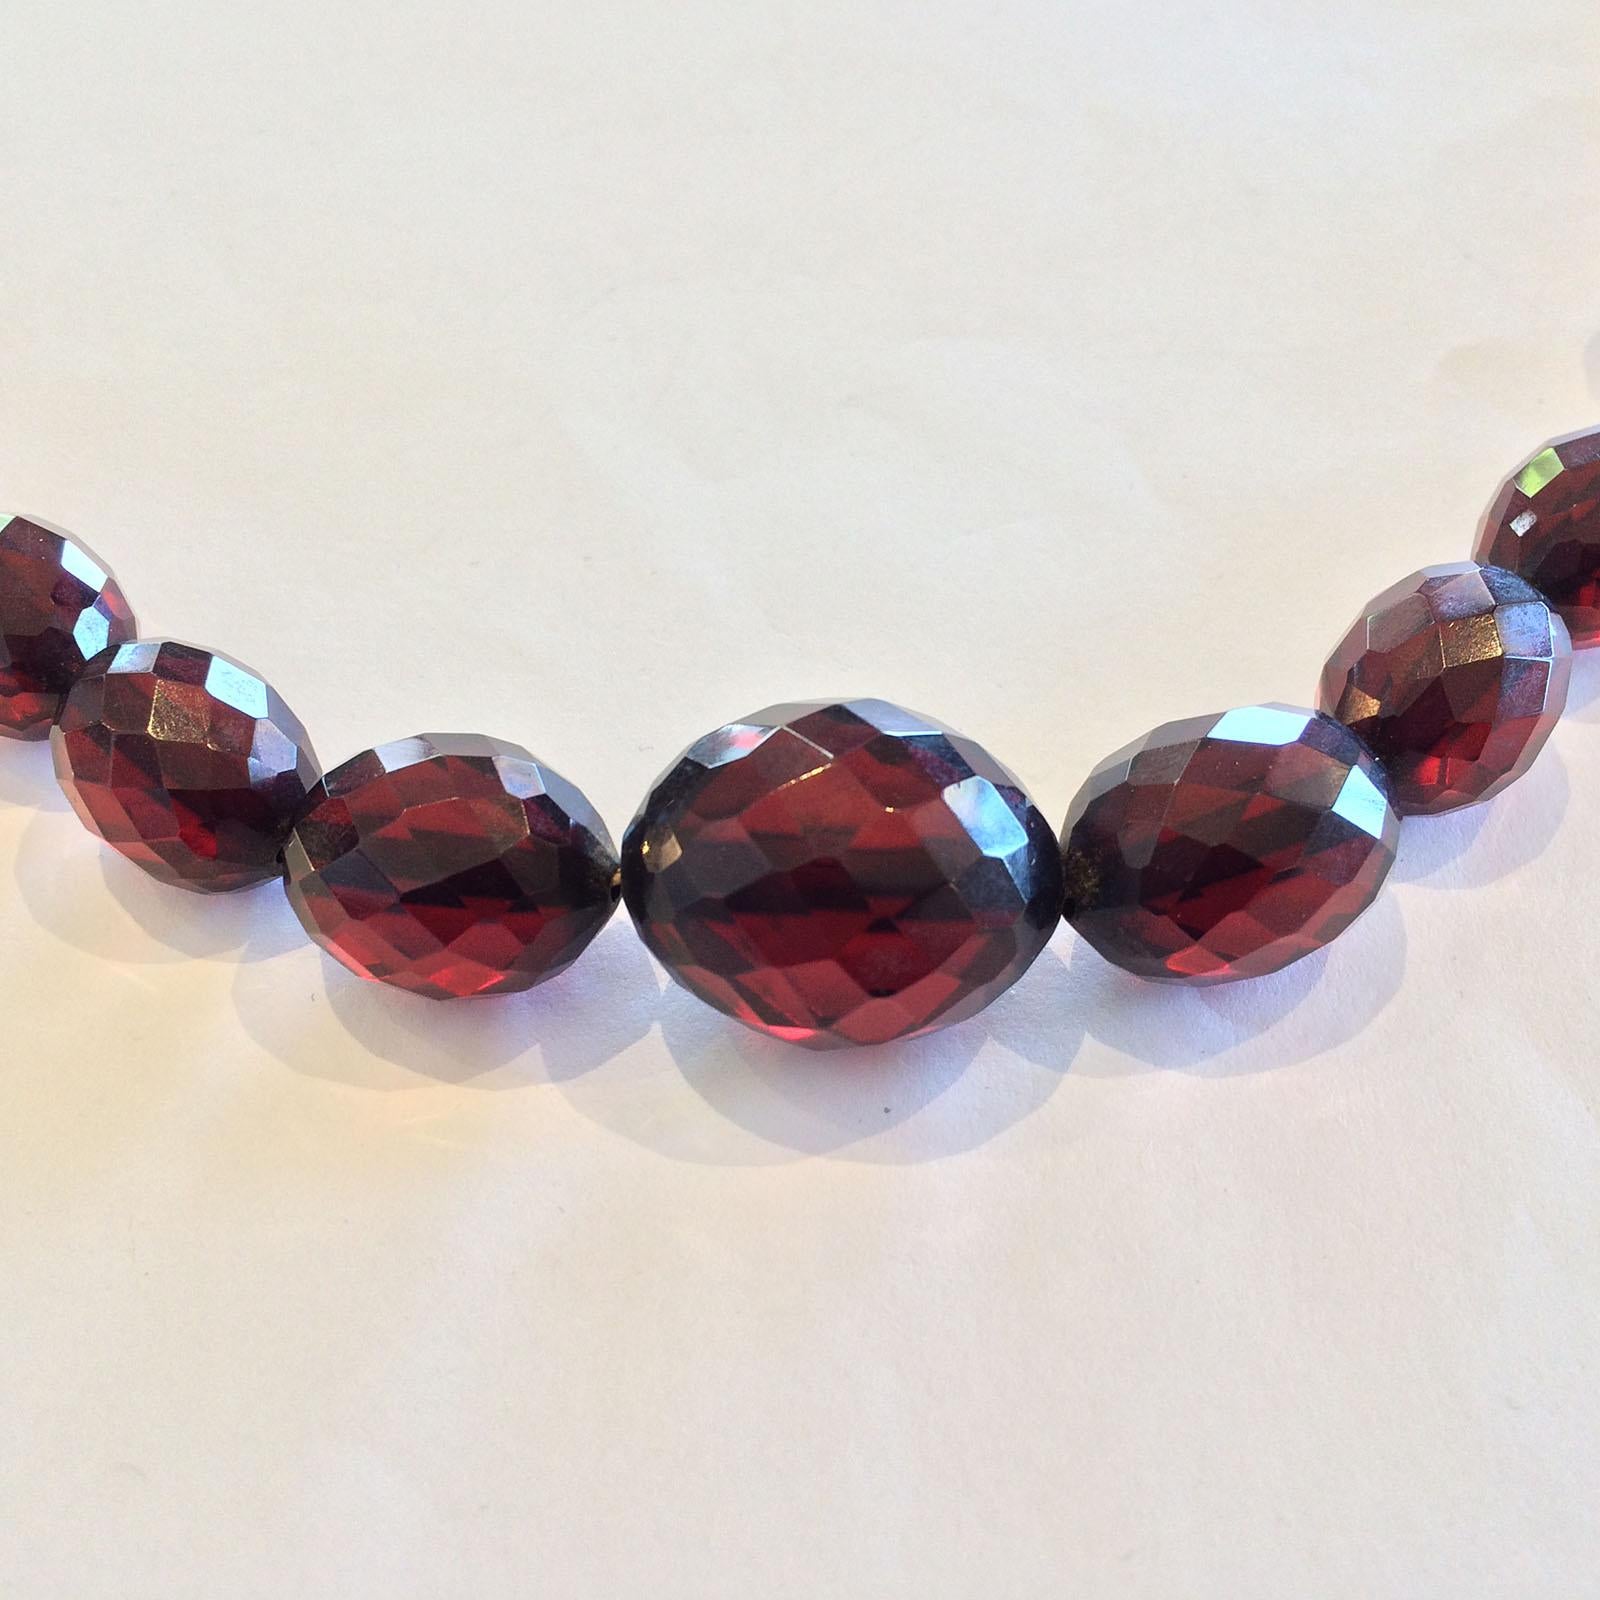 Art Deco Cherry Amber Colour Bakelite Facetted Necklace in tapered Beads, with the original Celluloid threaded stud clasp, all in total original condition. No damage or repairs, just a light , soft Patina from age. An amazing piece in extraordinary